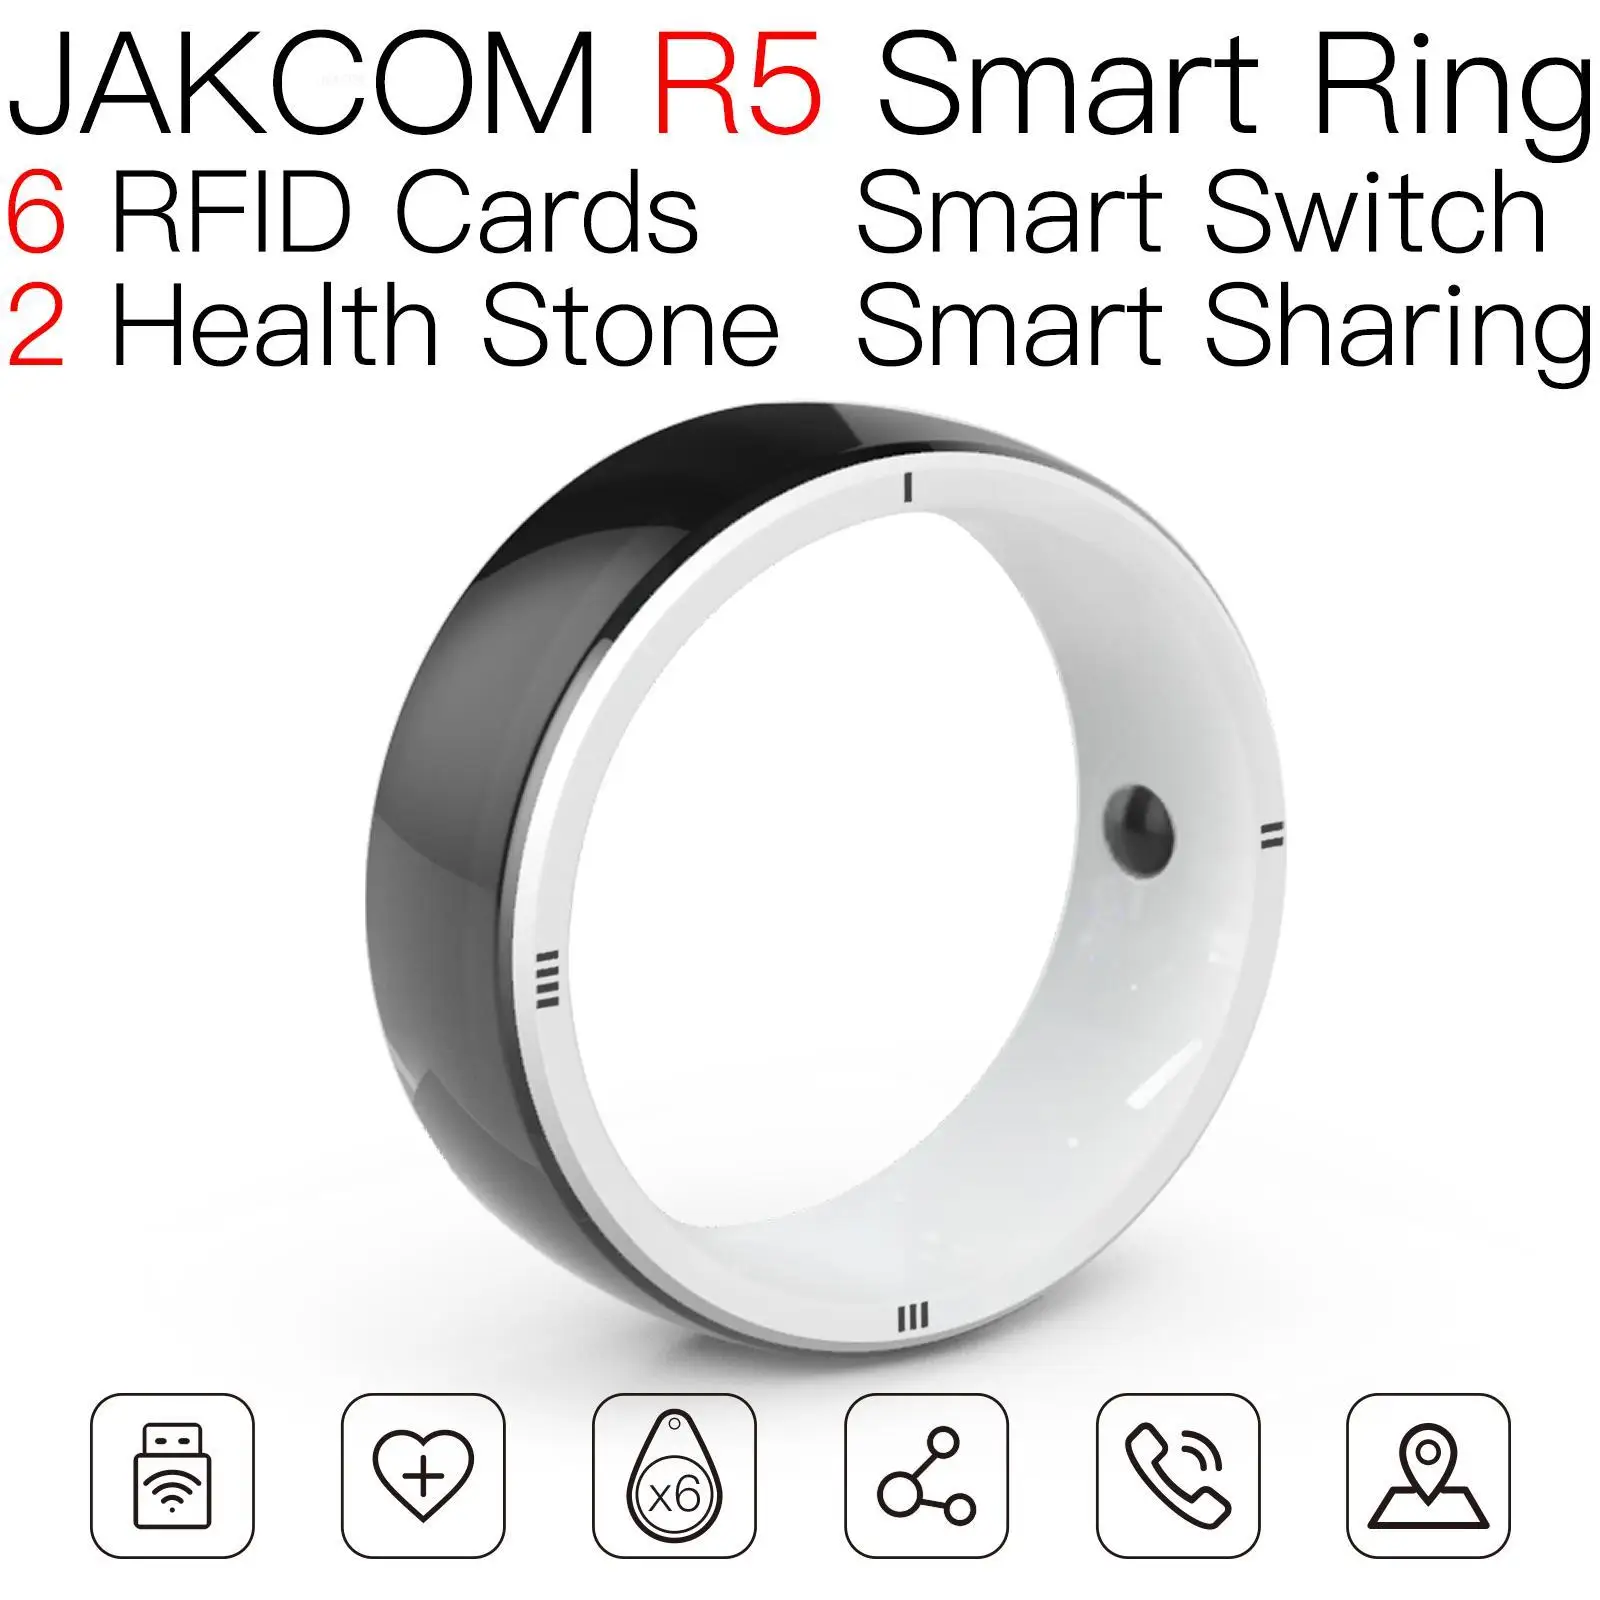 

JAKCOM R5 Smart Ring Match to hf tag 4k uid s70 100 adet nfc ntag215 card anjielo smart tags rfid uhf para libros label makers